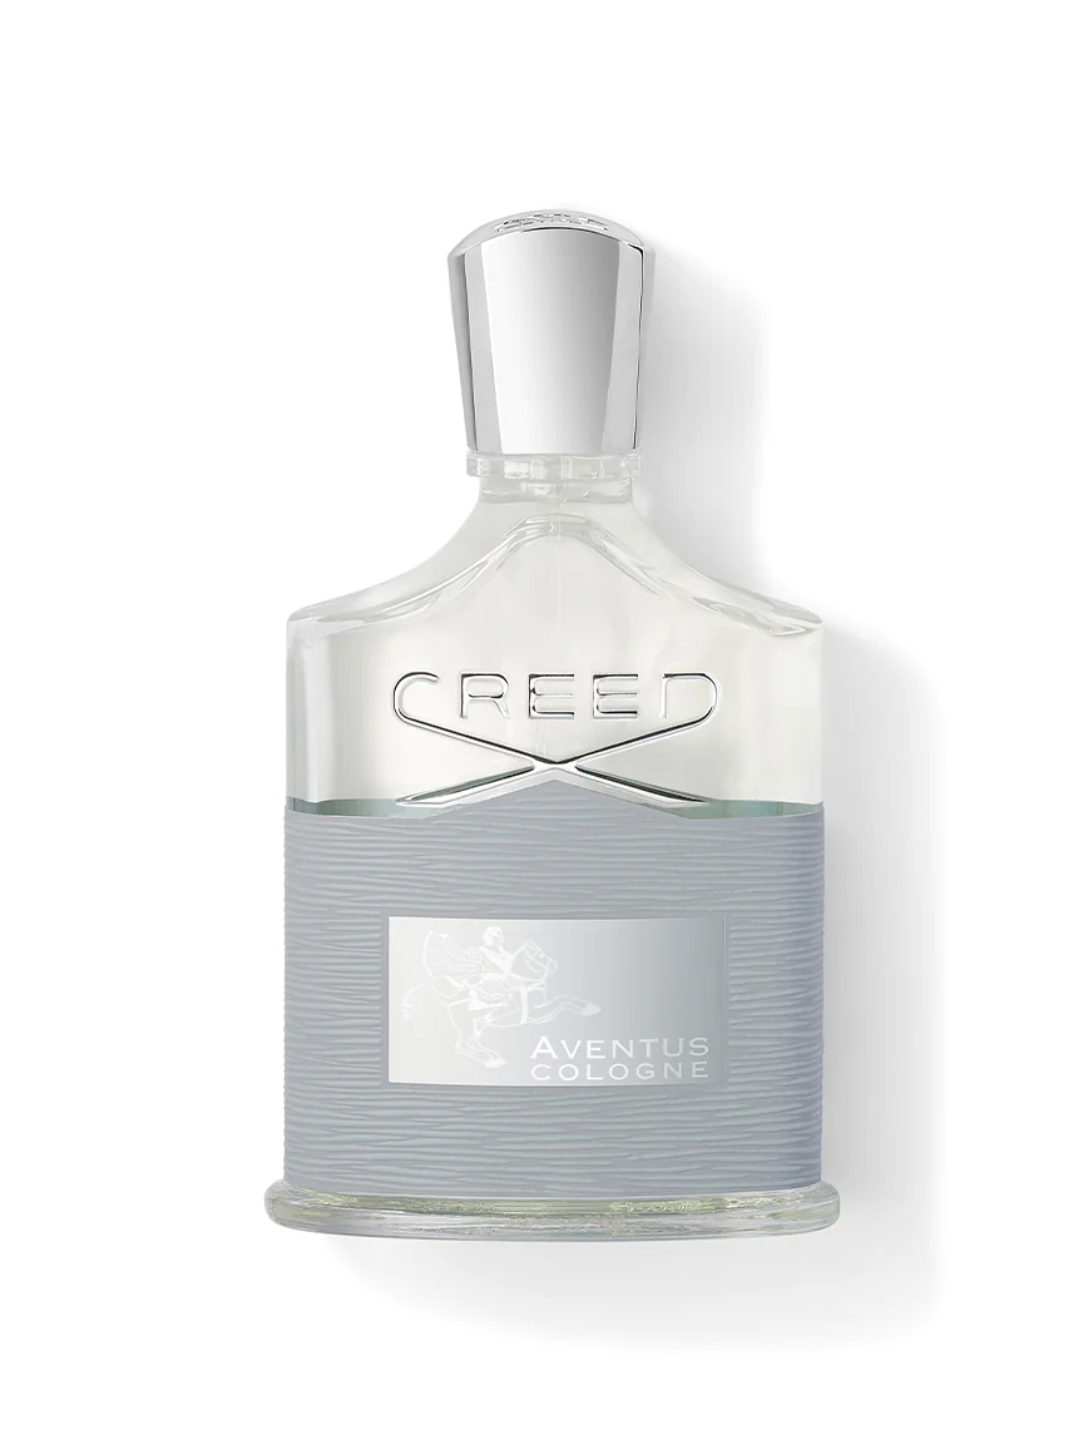 Creed Aventus Cologne Sample